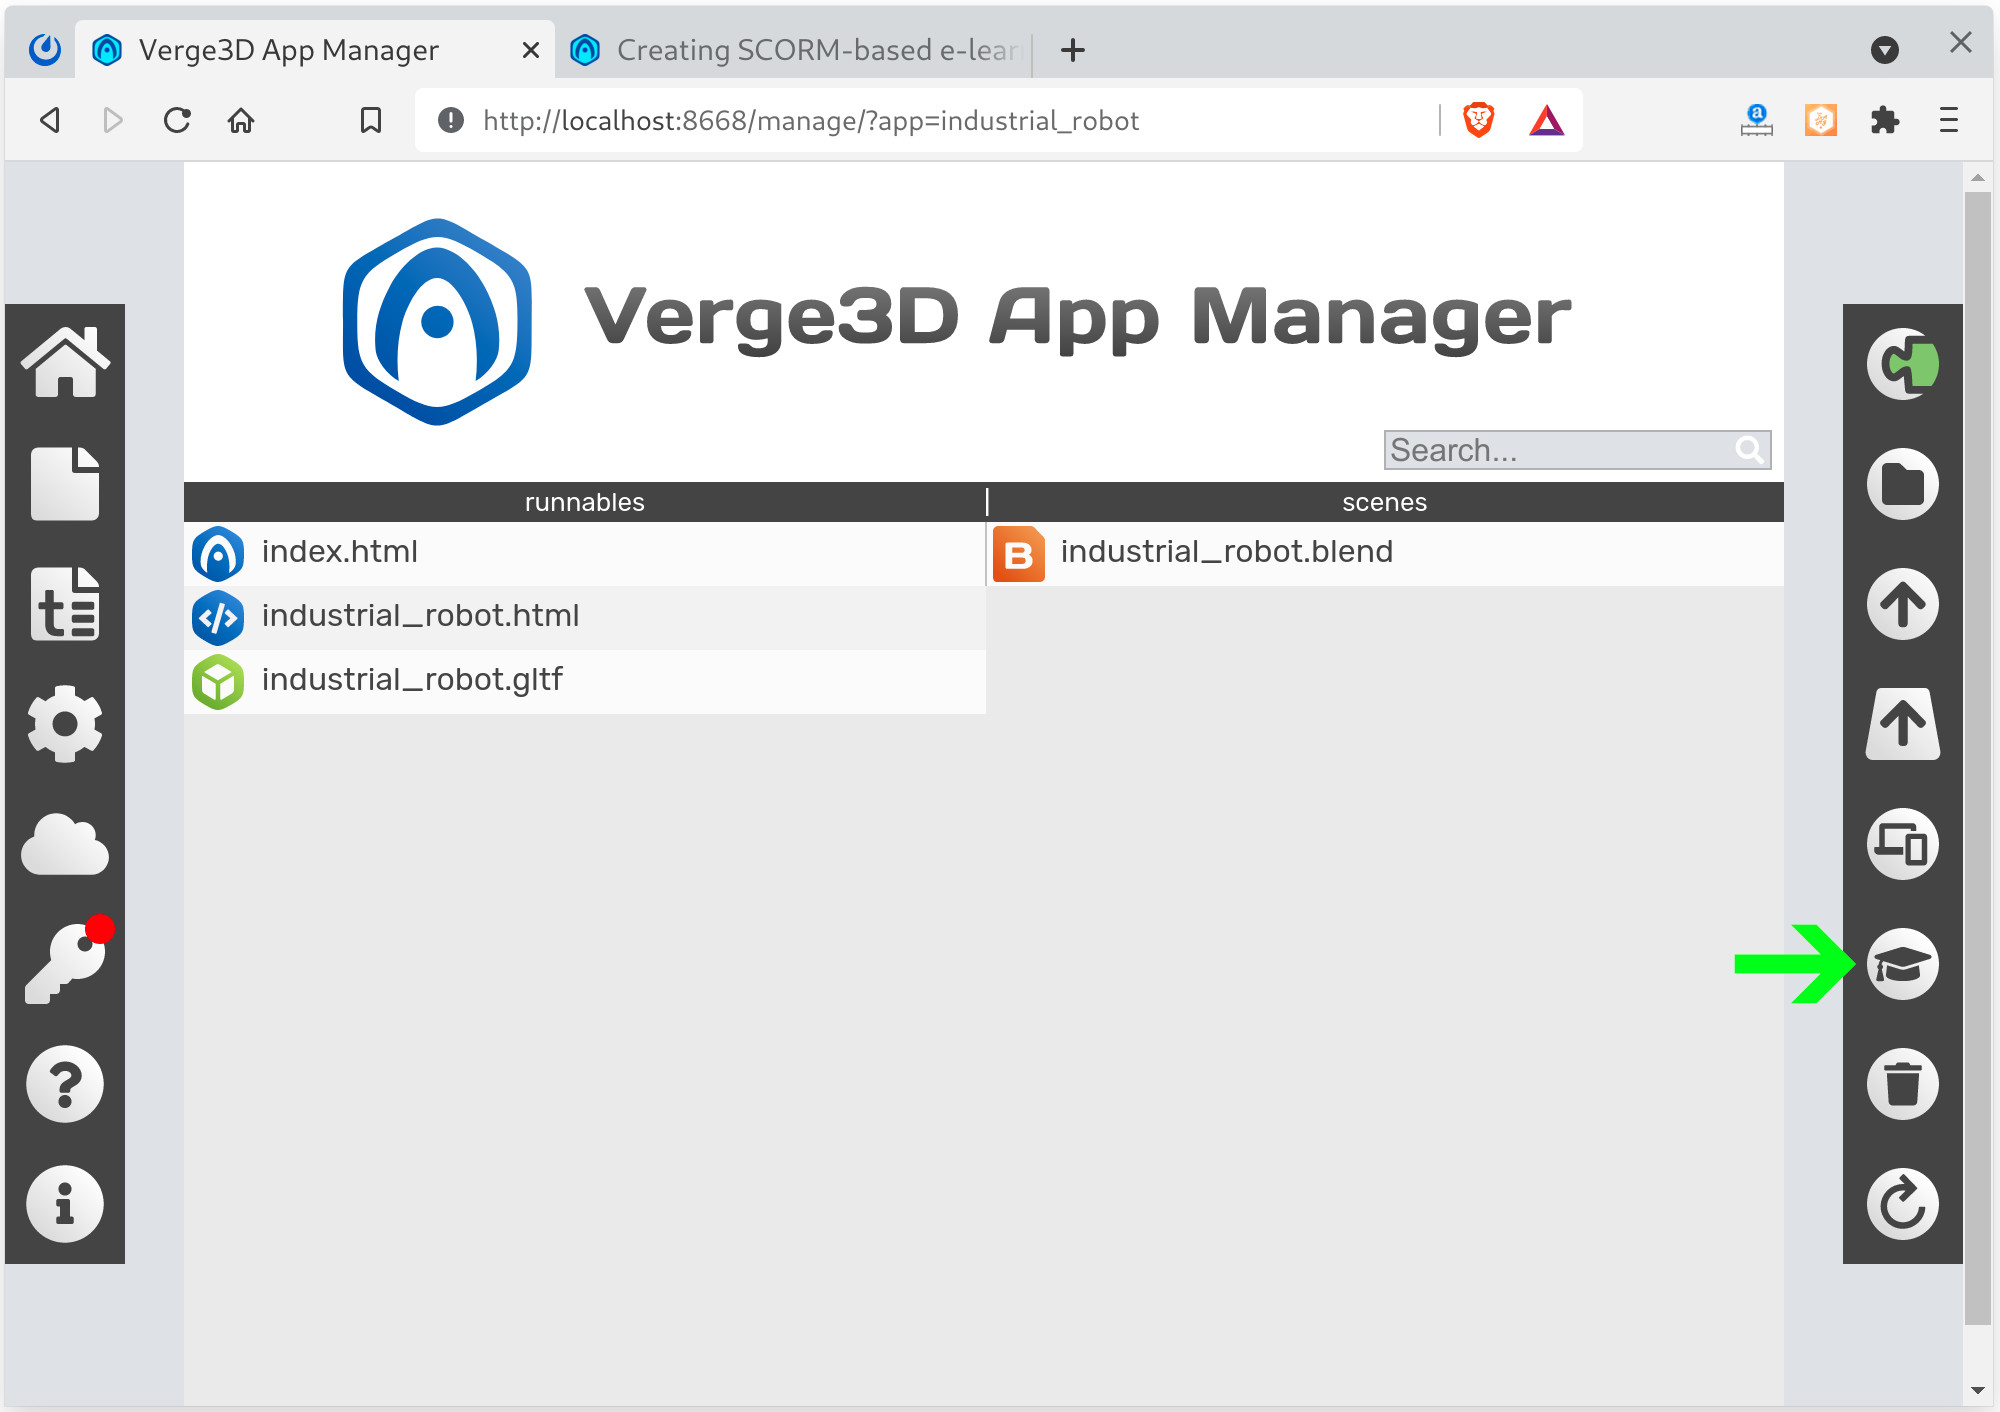 Button to create SCORM courses with Verge3D